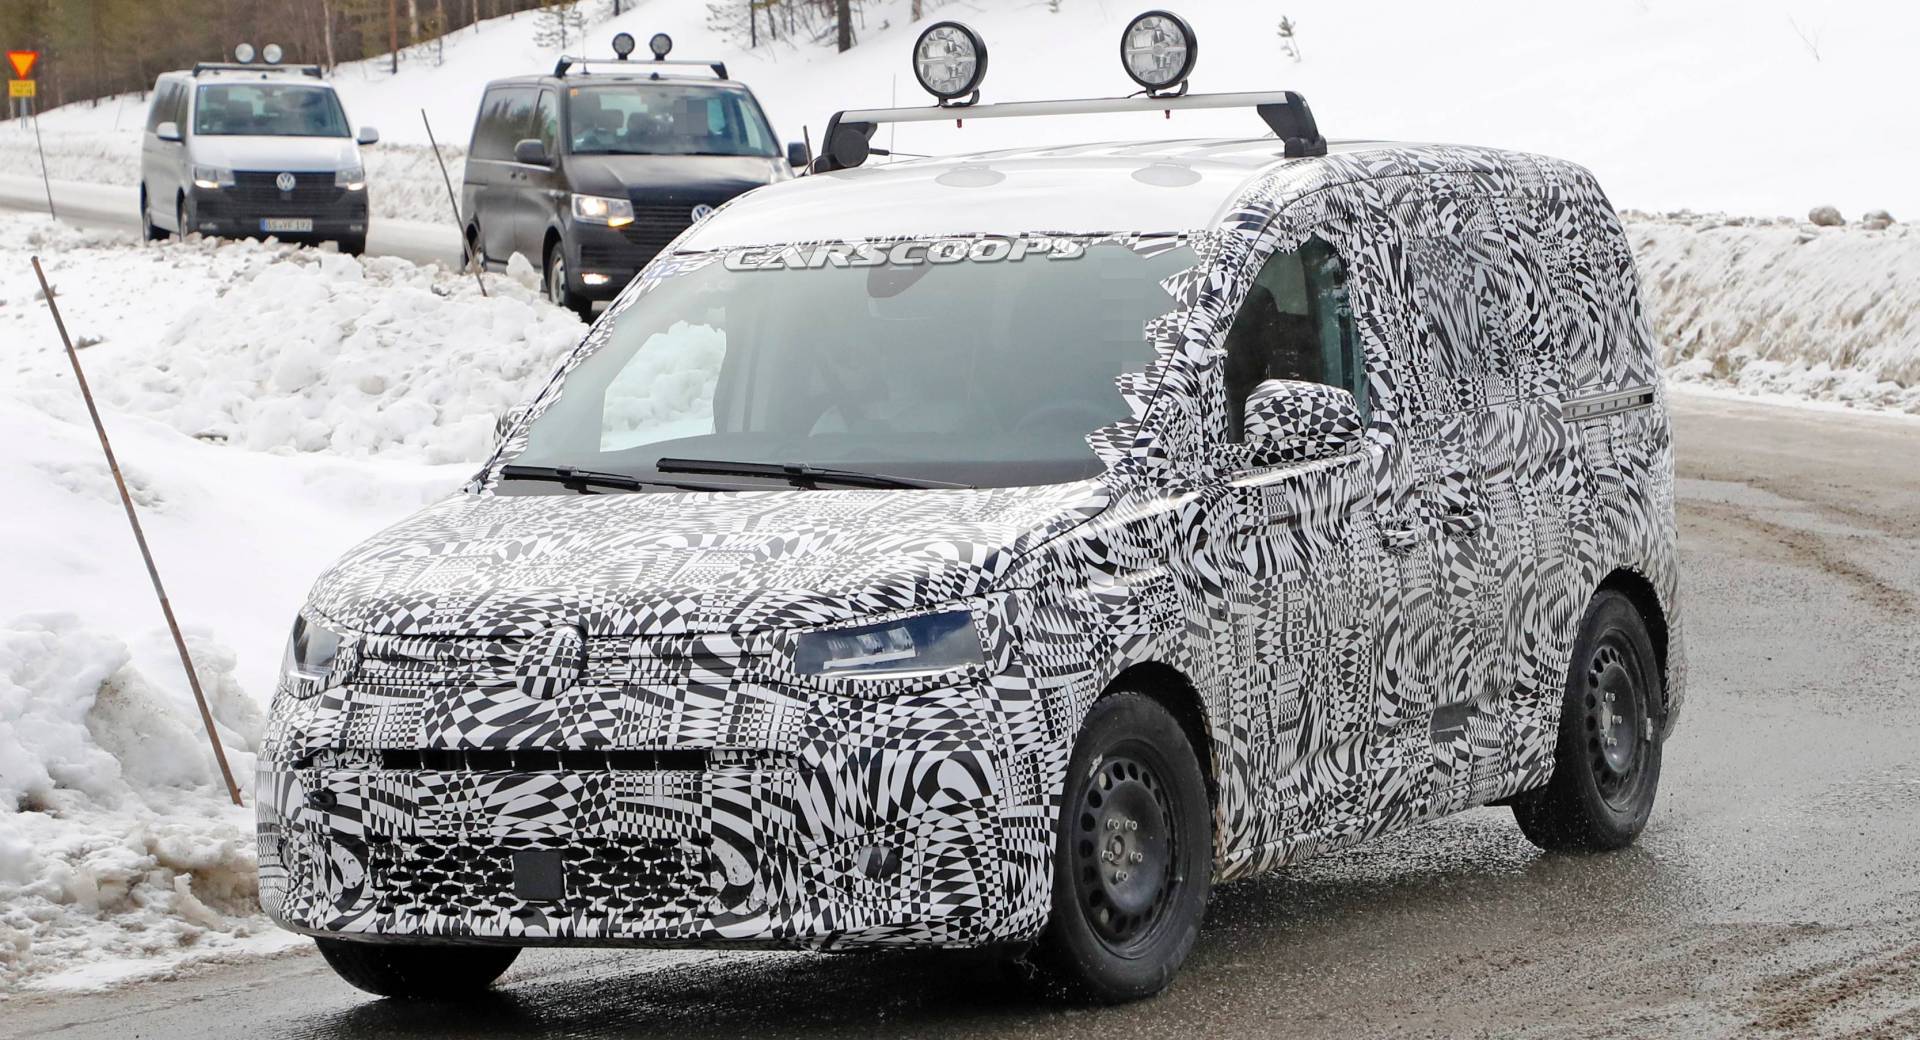 AllNew 2021 VW Caddy Compact Van Spotted For The First Time Carscoops